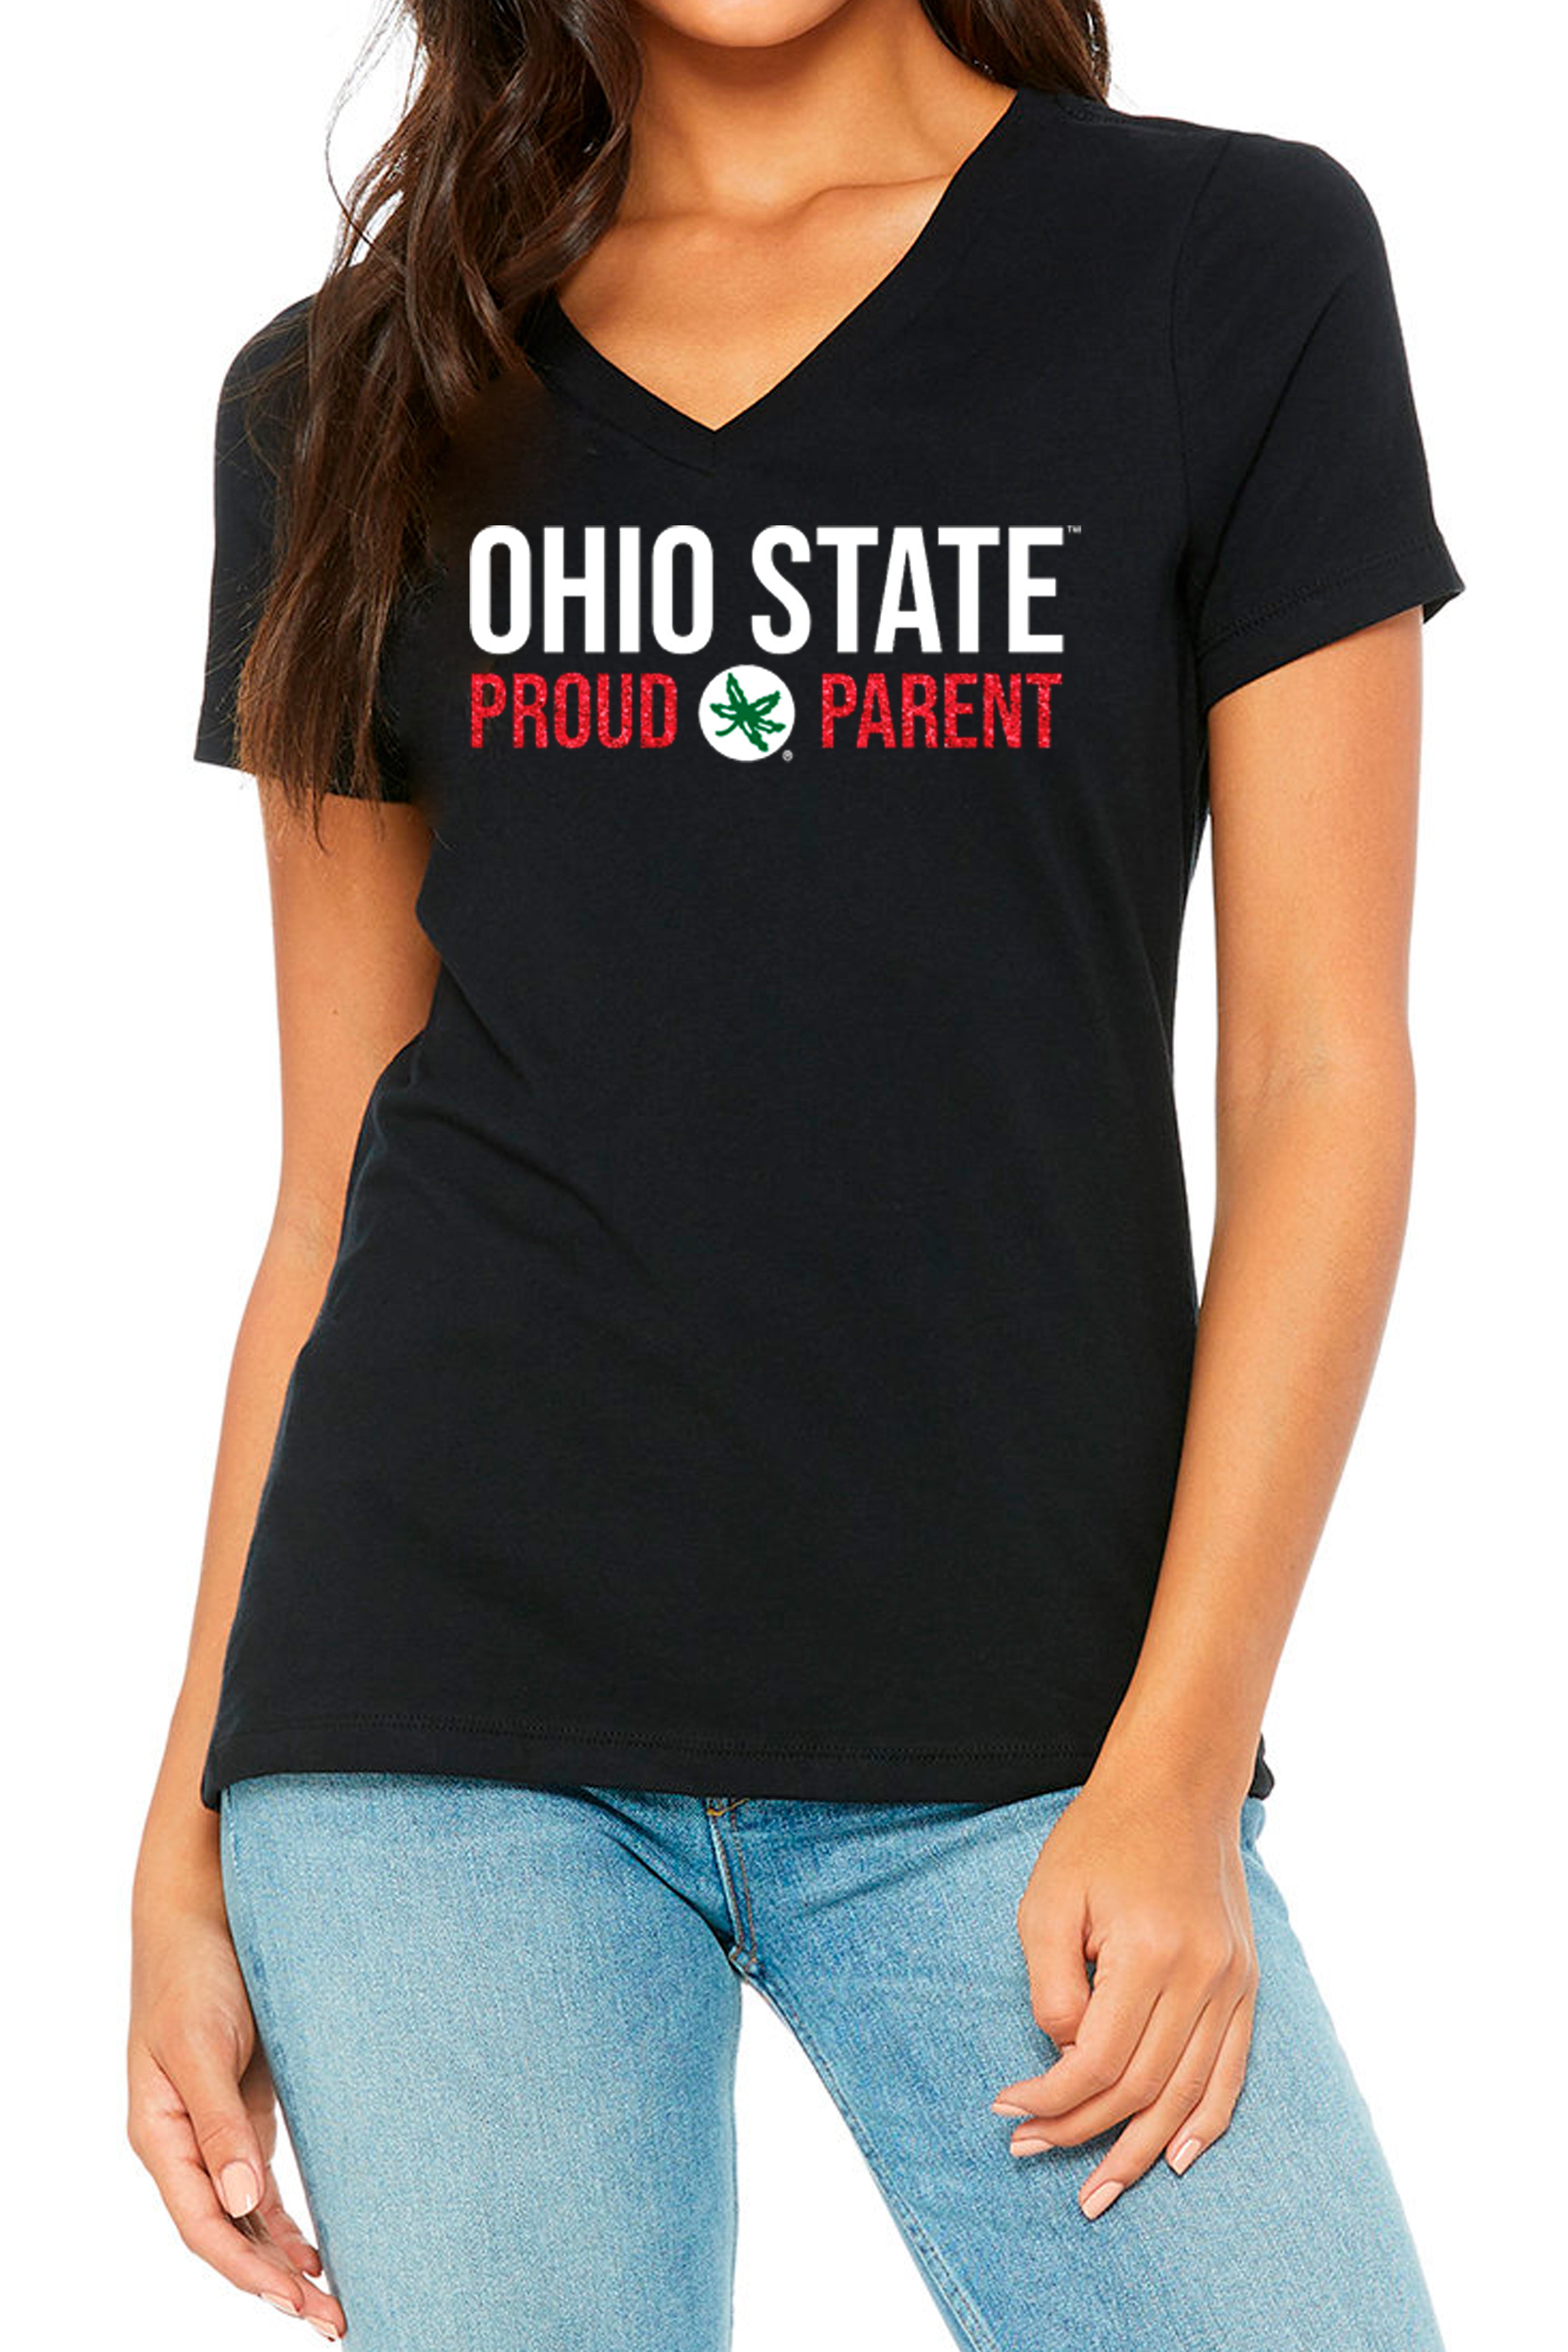 2407 - Women's  Ohio State "Proud Parent" Relaxed V-Neck Tee/Black